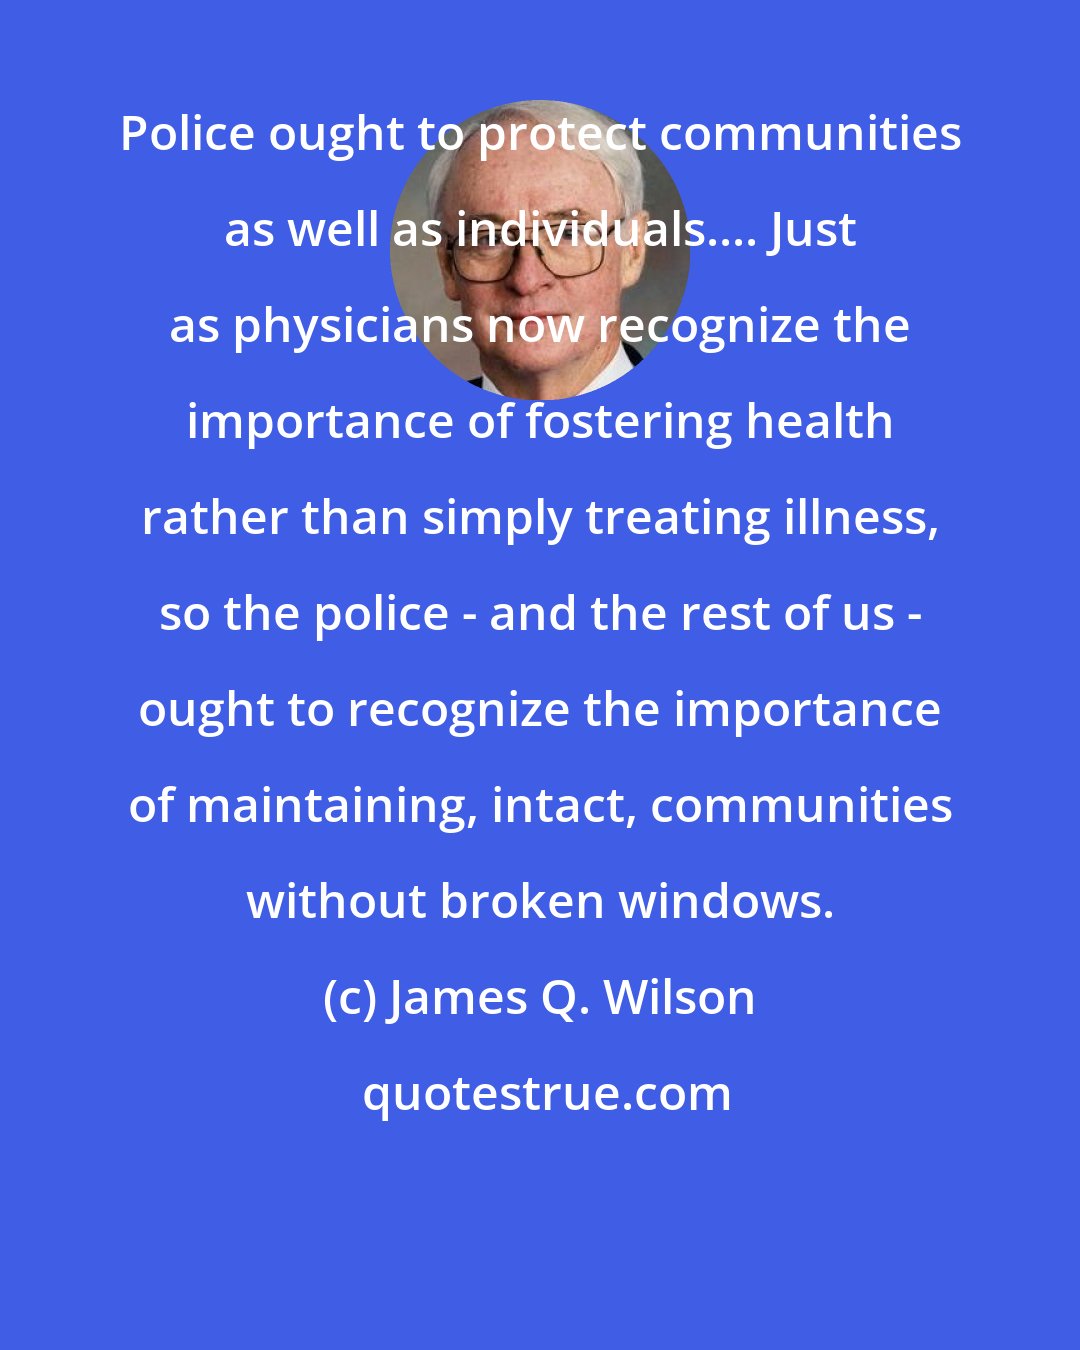 James Q. Wilson: Police ought to protect communities as well as individuals.... Just as physicians now recognize the importance of fostering health rather than simply treating illness, so the police - and the rest of us - ought to recognize the importance of maintaining, intact, communities without broken windows.